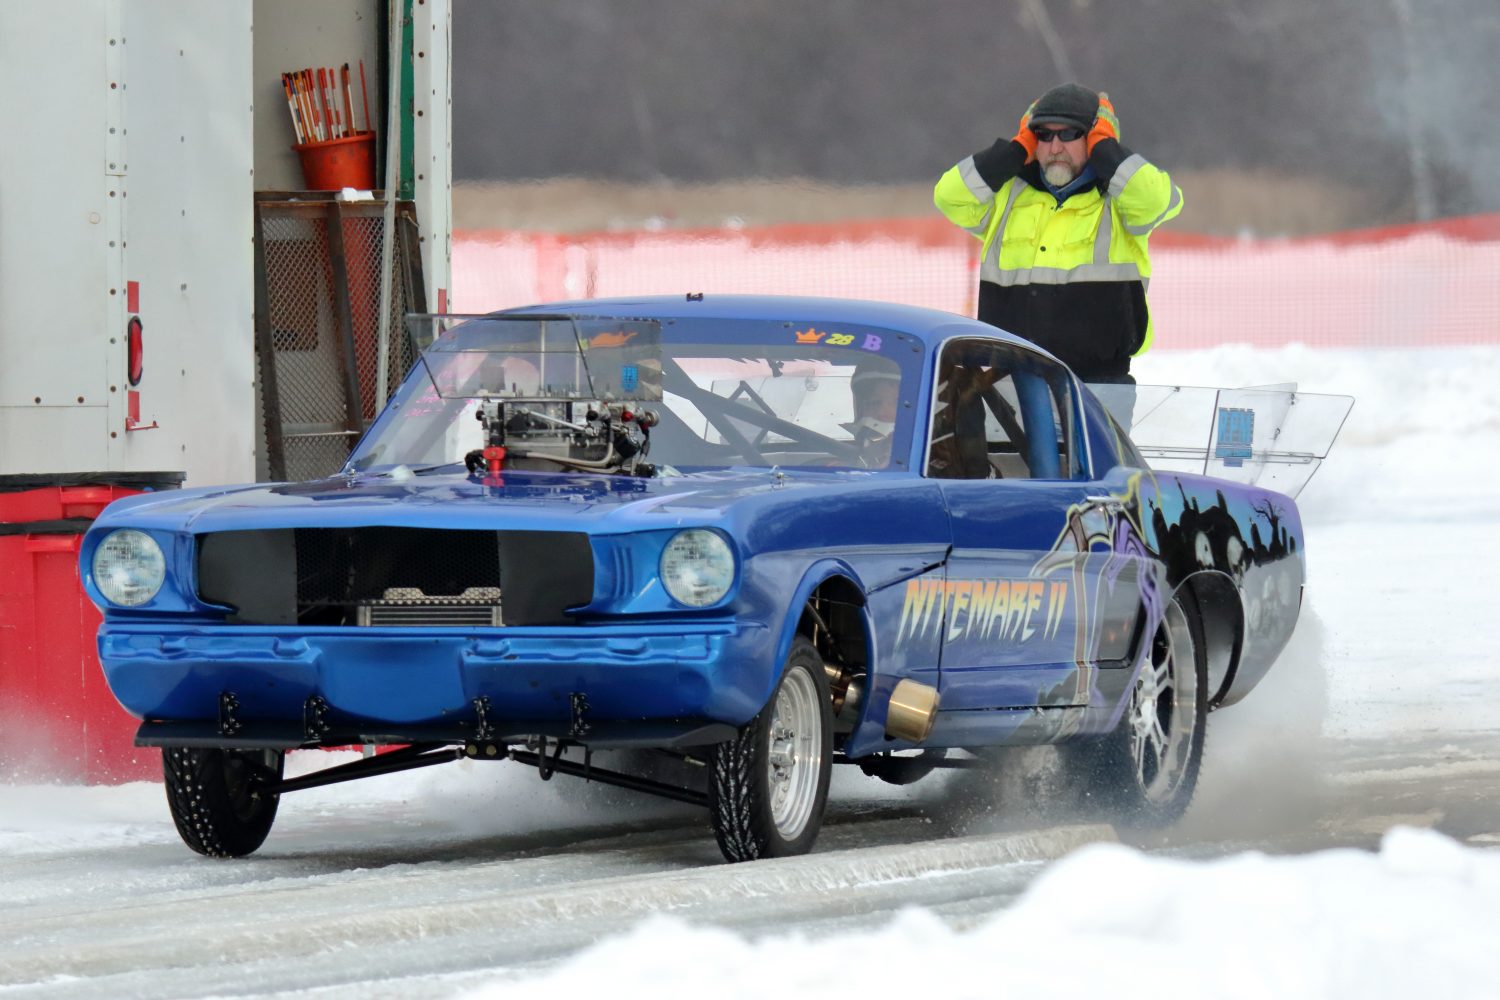 World Championship Merrill Ice Drags concludes their season; 2022 Season Champions announced